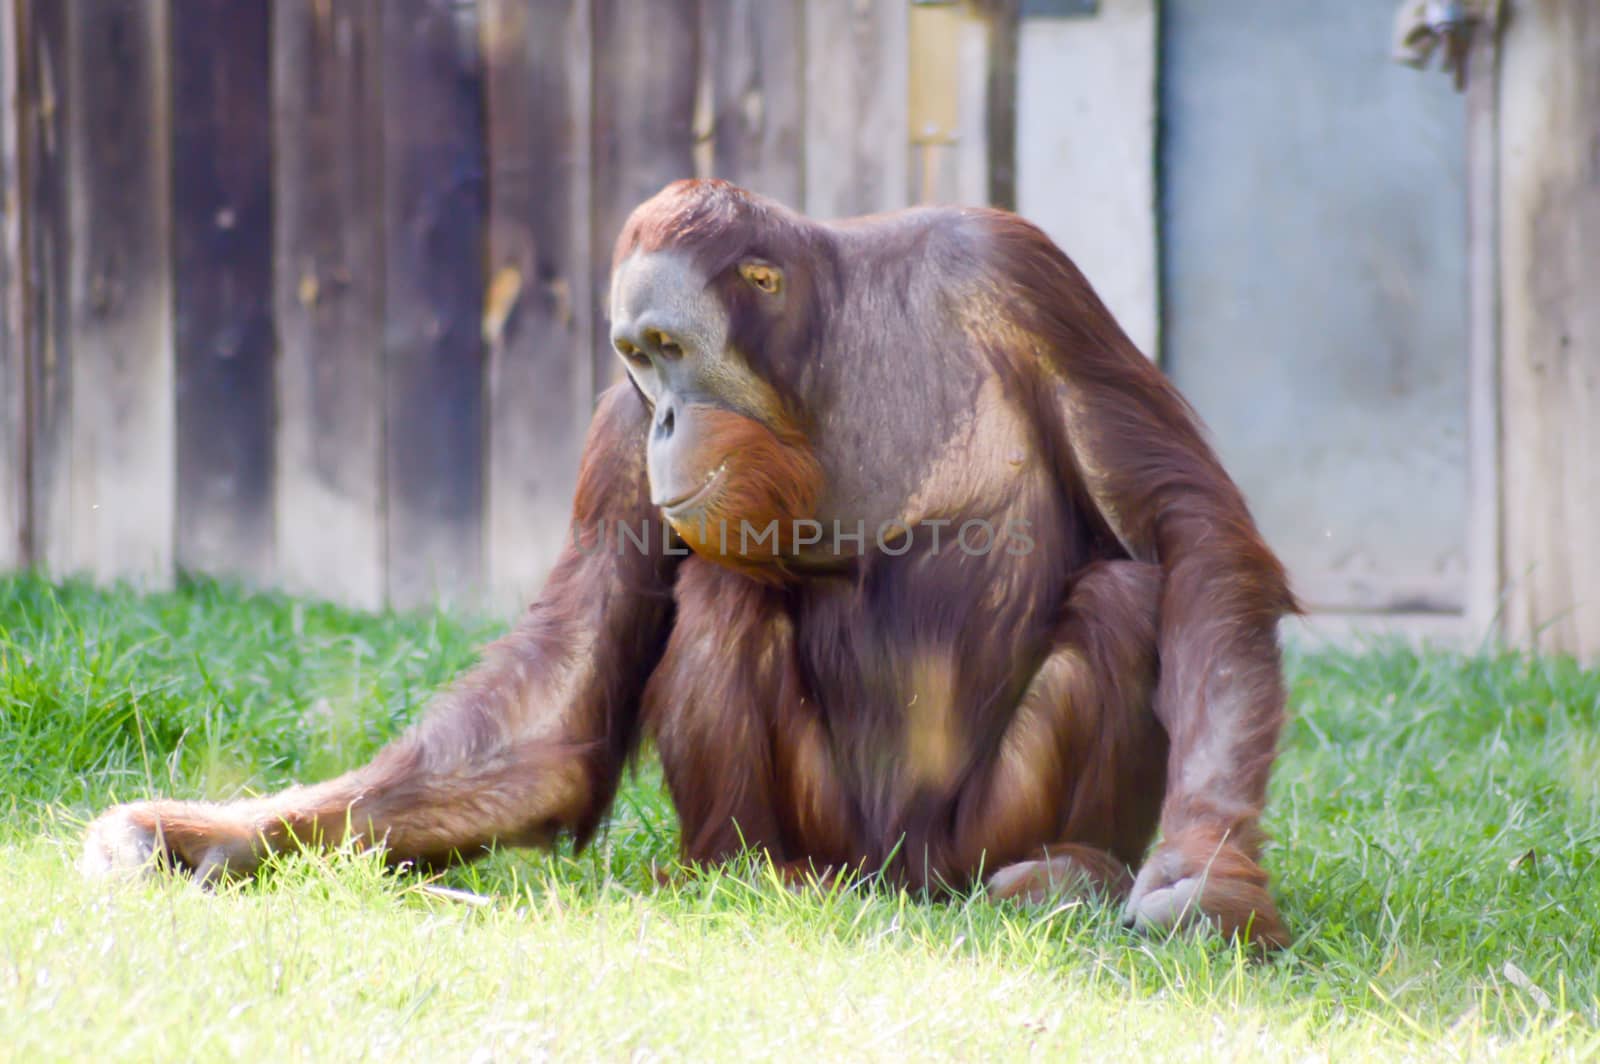 Monkey Orang-Outang walking in a green by Philou1000